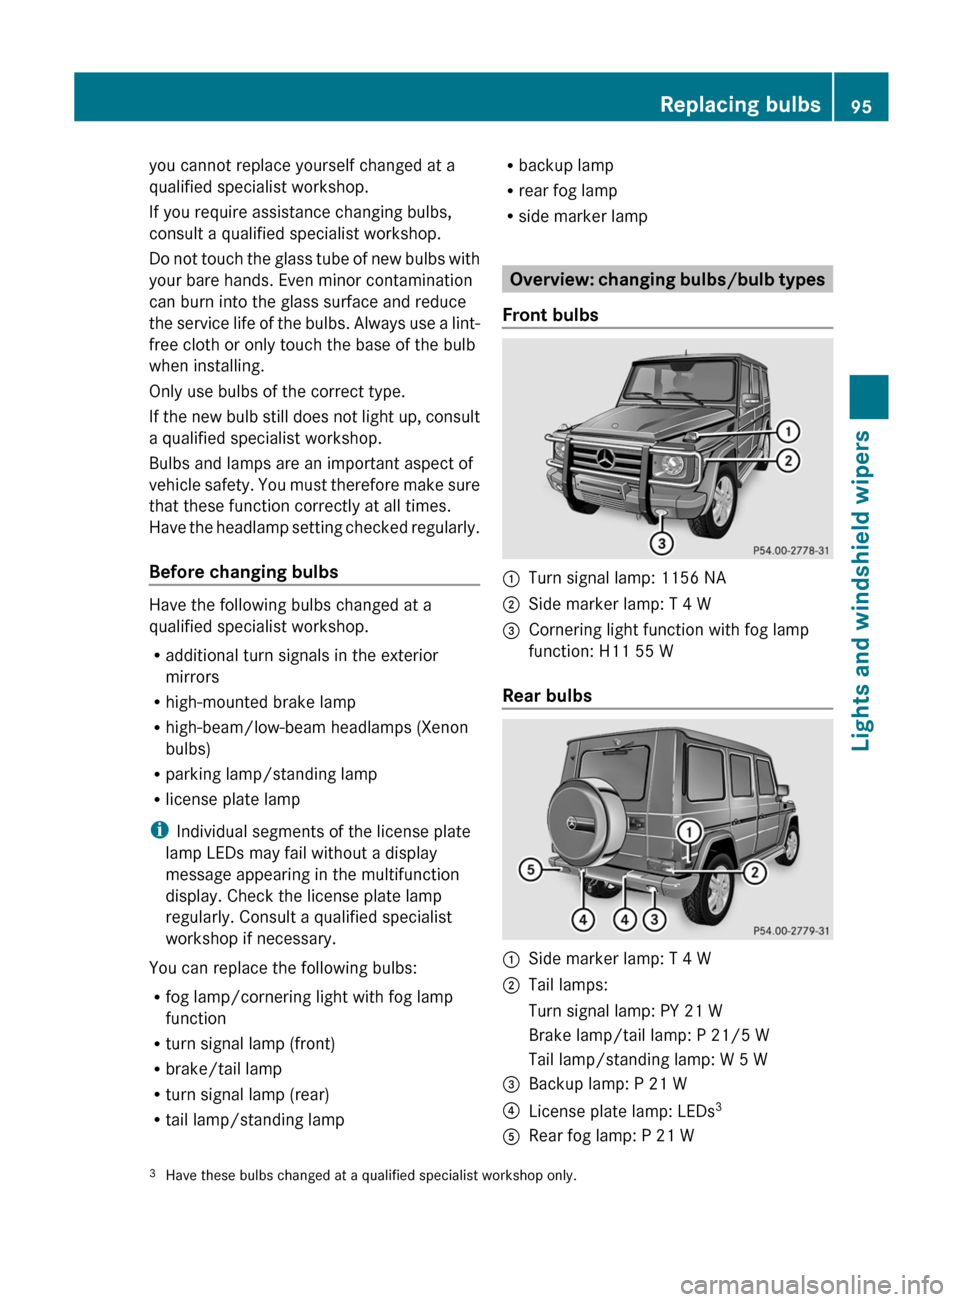 MERCEDES-BENZ G-Class 2012 W463 Owners Manual you cannot replace yourself changed at a
qualified specialist workshop.
If you require assistance changing bulbs,
consult a qualified specialist workshop.
Do 
not 
touch the glass tube of new bulbs wi